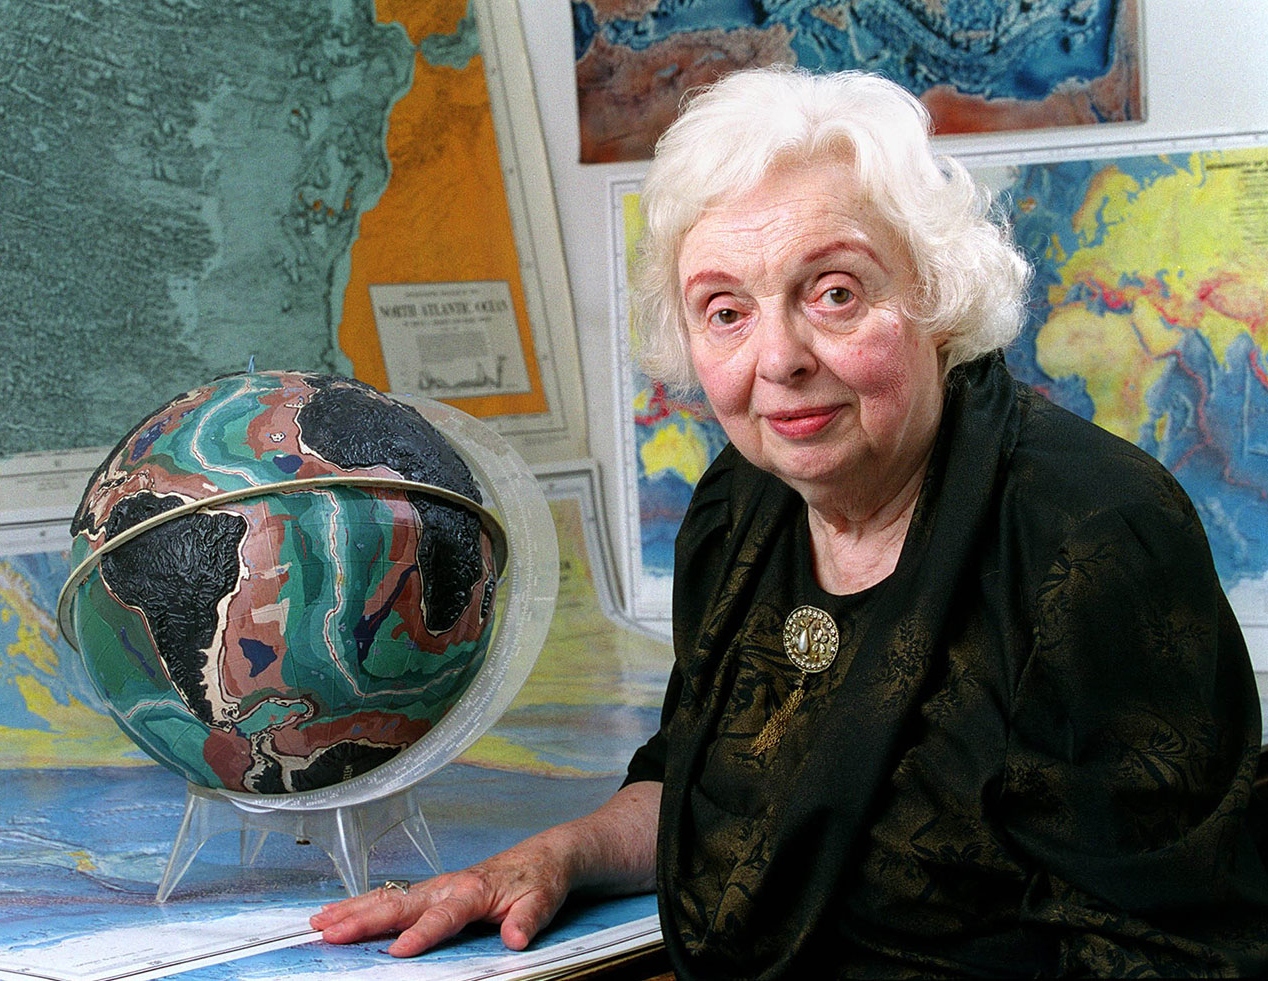 Marie Tharp standing next to a globe and in front of world maps in July 2001.